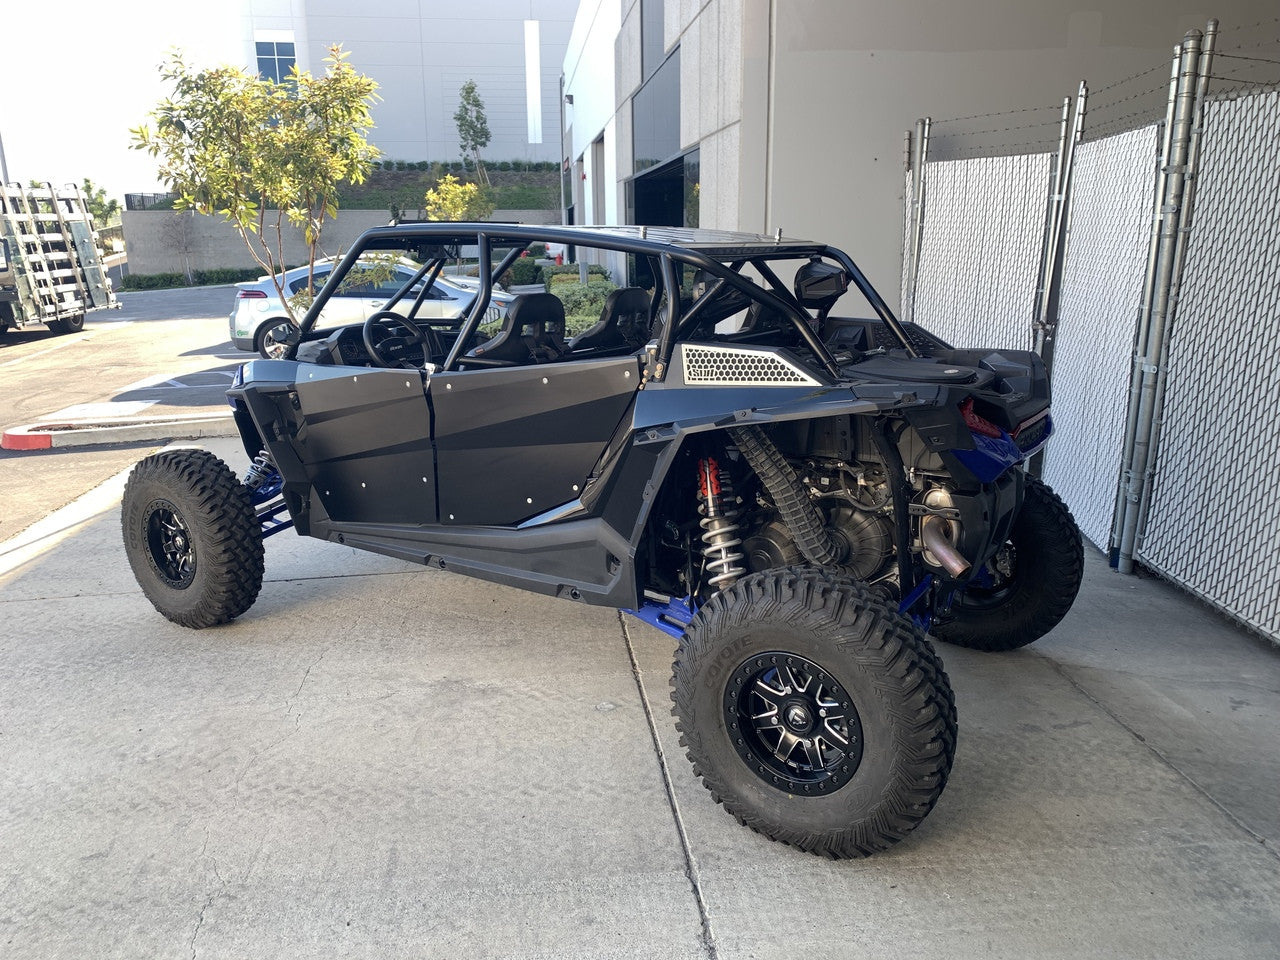 SDR XPR-4 Fastback Shorty Cage | RZR XP 1000/XP Turbo/Turbo-S